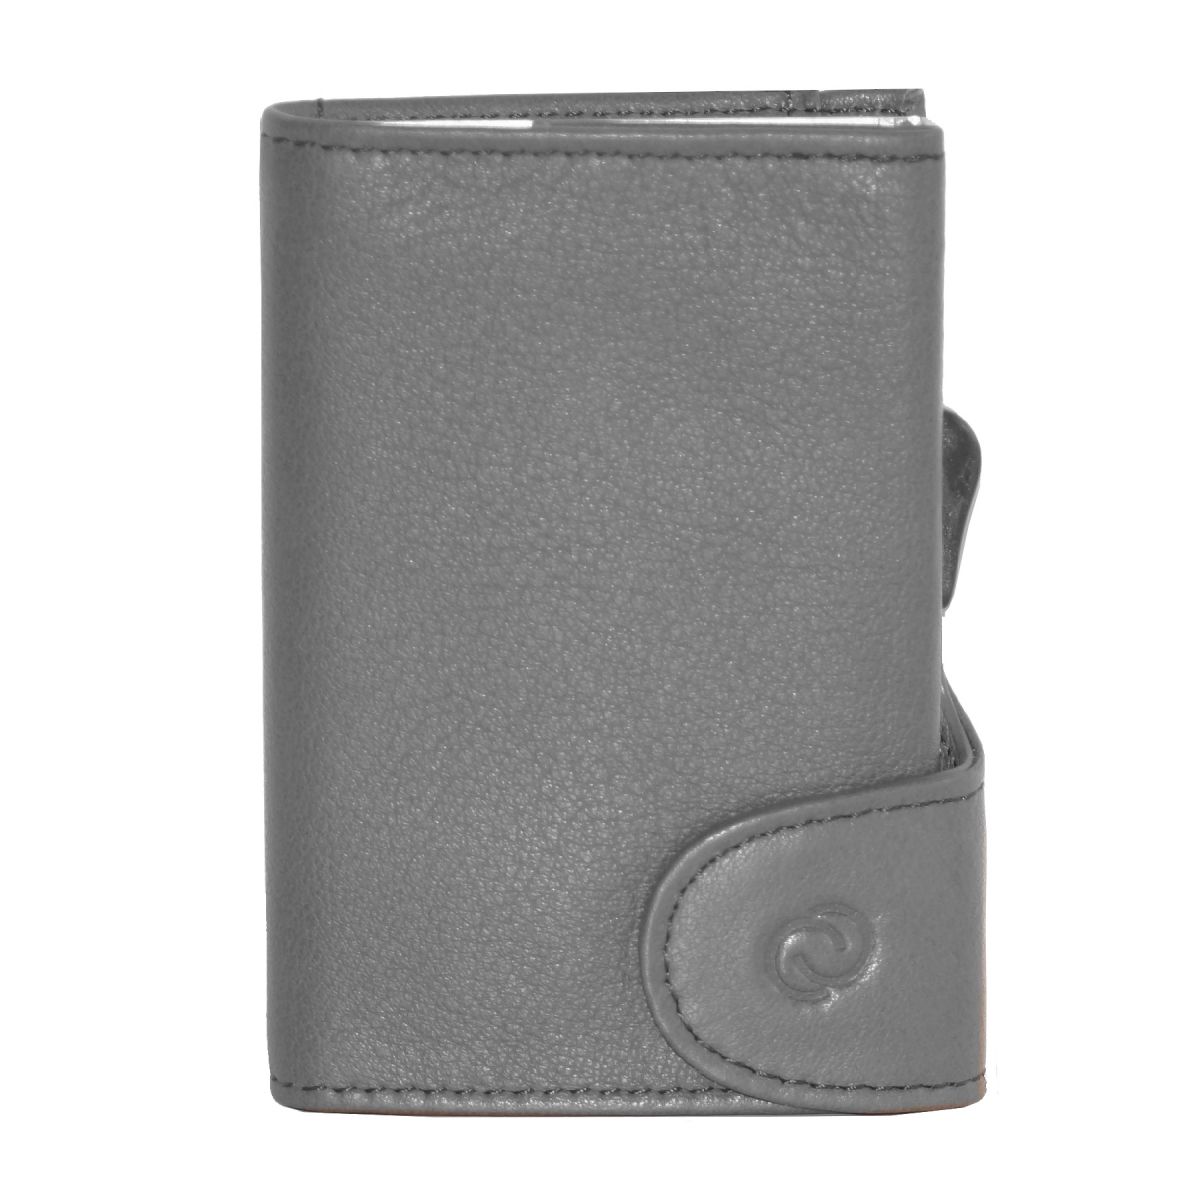 C-Secure Aluminum Card Holder with Genuine Leather - Grey